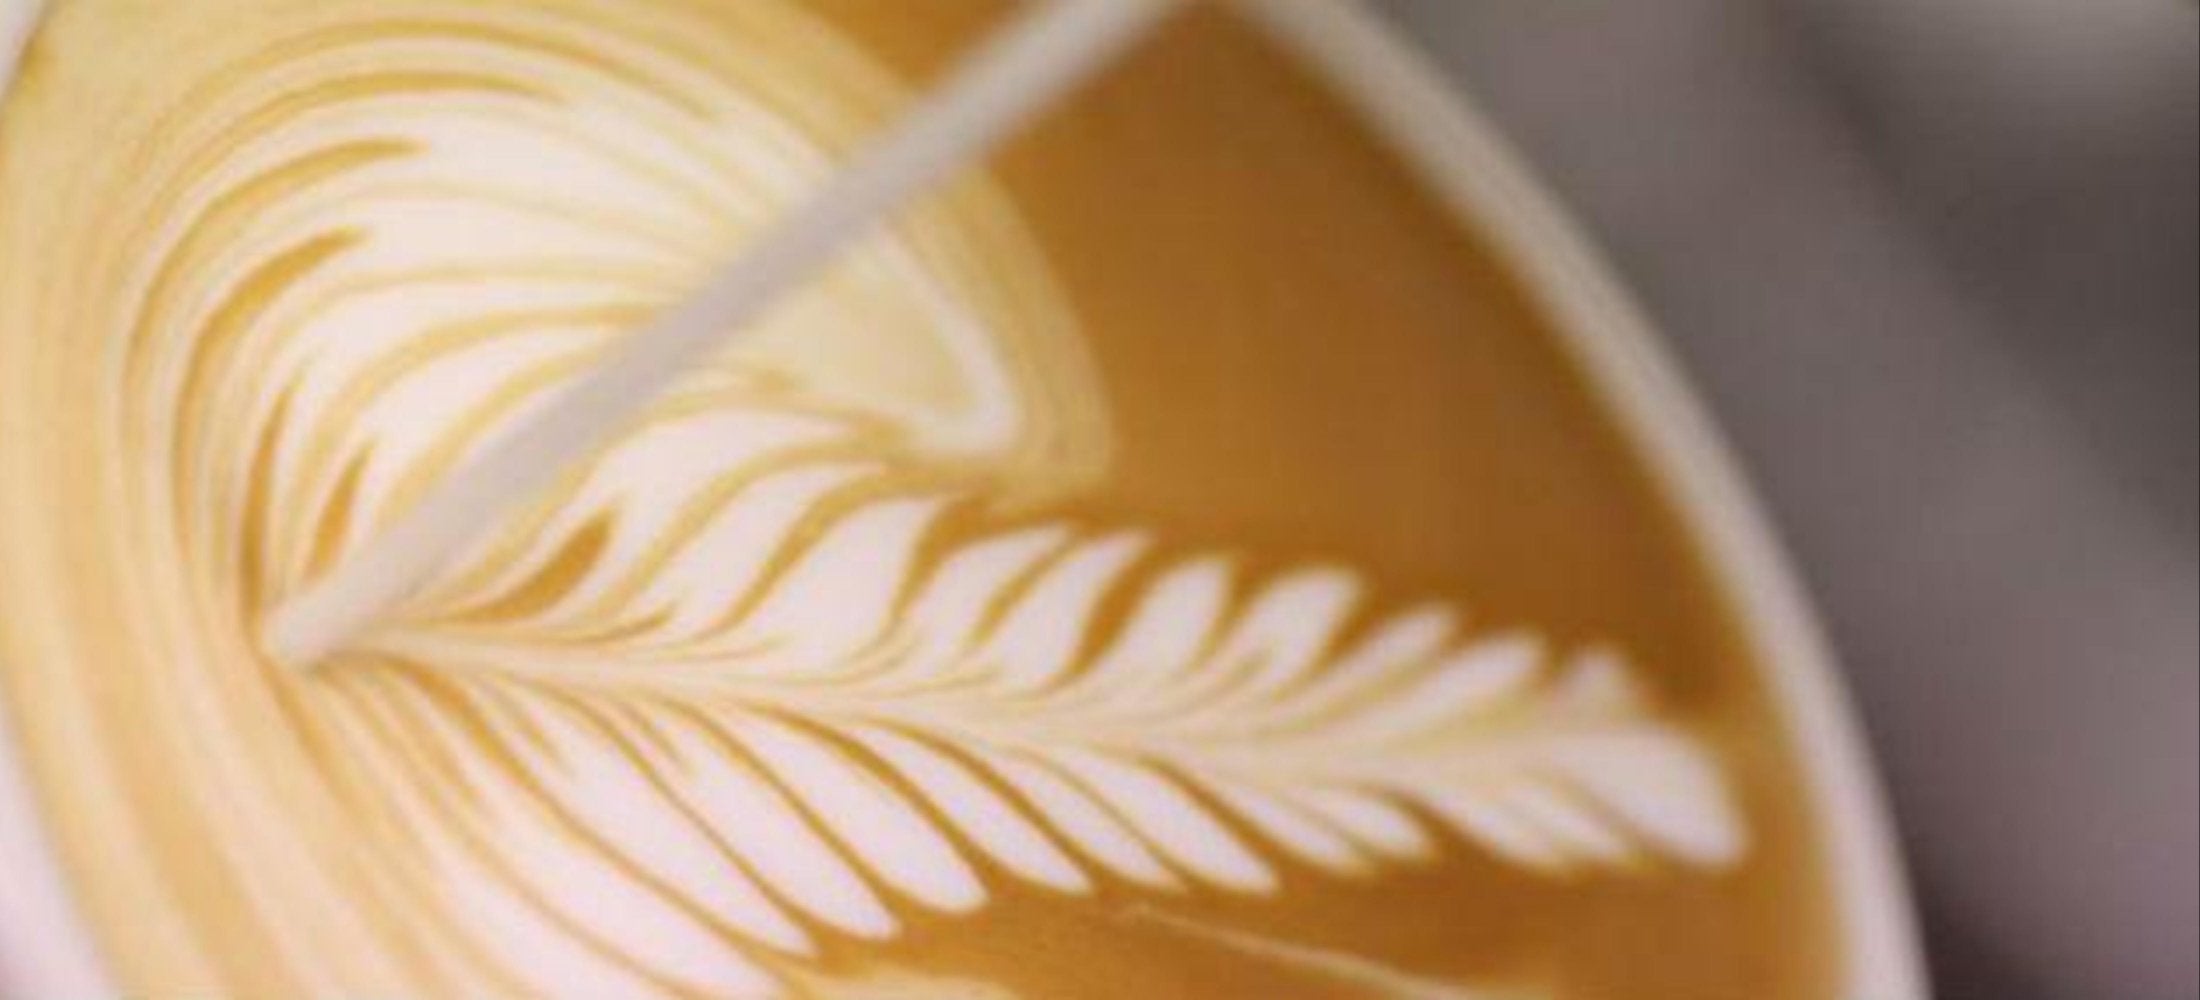 Latte Art Makes Beautiful Coffee Pictures on Social Media